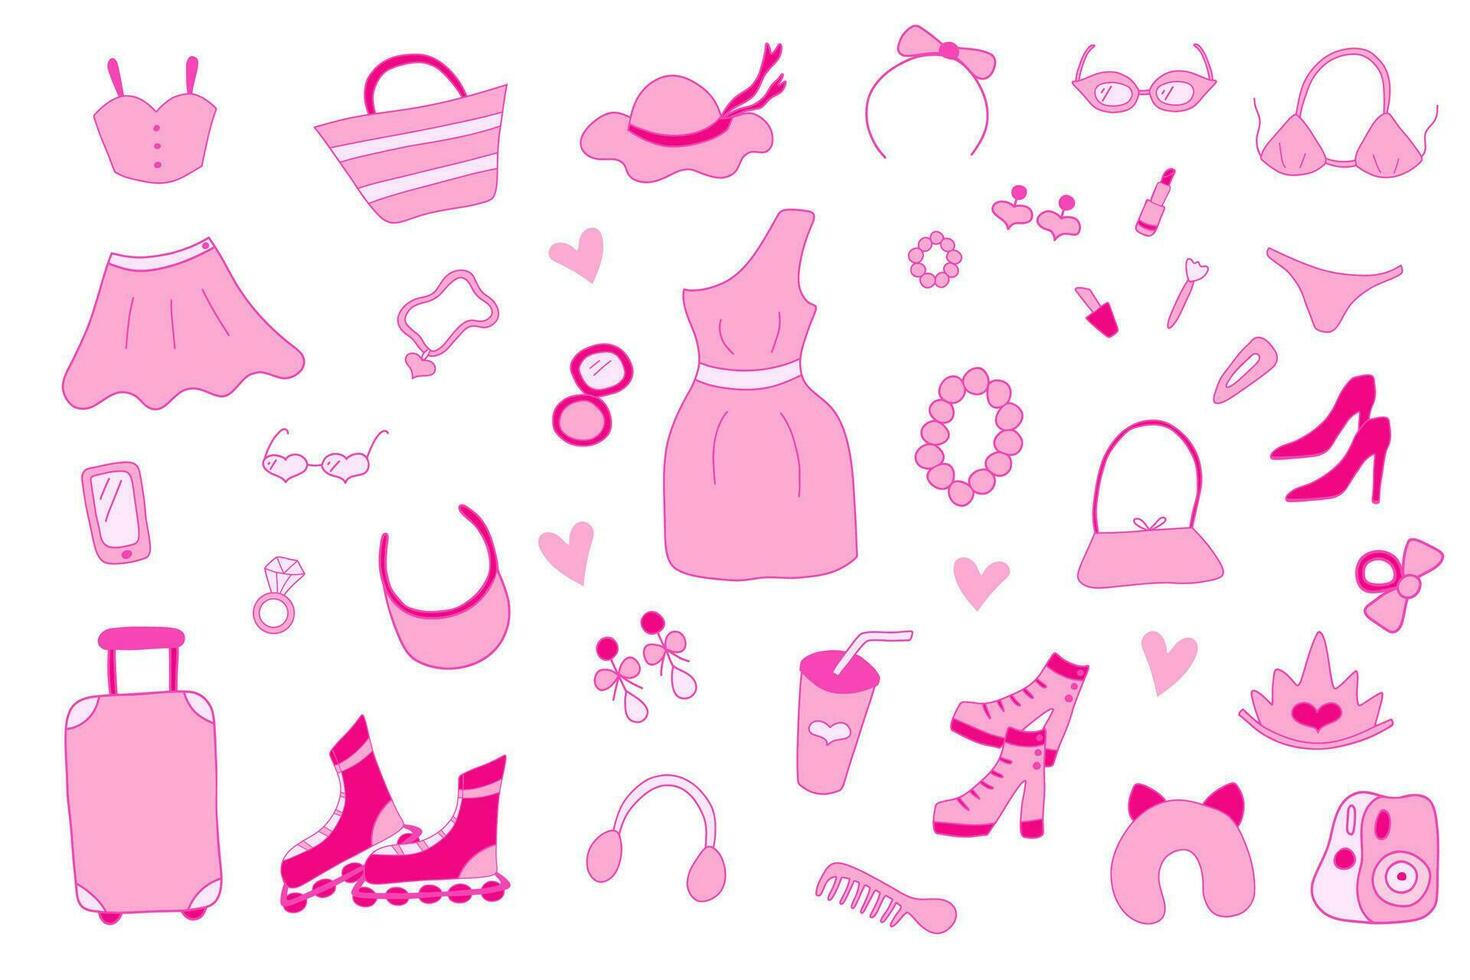 Glamorous trendy pink stickers set. Nostalgic barbiecore 2000s style collection.Isolated elements on white background dress, swimsuit, phone, camera, glasses, lipstick, hat, shoes, bag, rollers vector